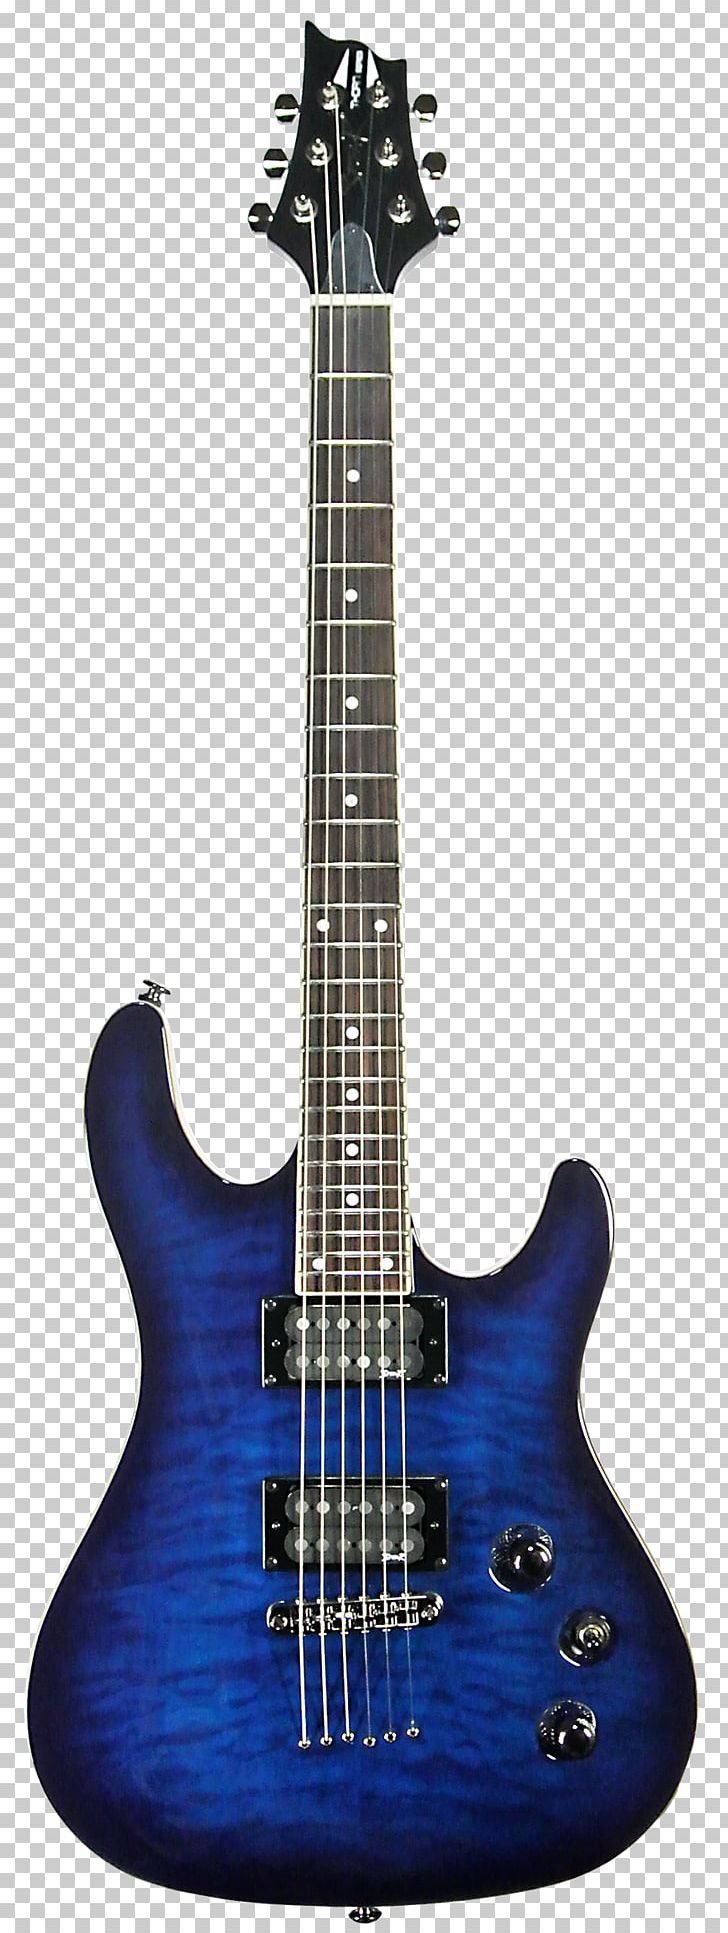 Floyd Rose Electric Guitar Schecter Guitar Research PRS Guitars PNG, Clipart, Acoustic Electric Guitar, Acoustic Guitar, Bass Guitar, Bridge, Elect Free PNG Download